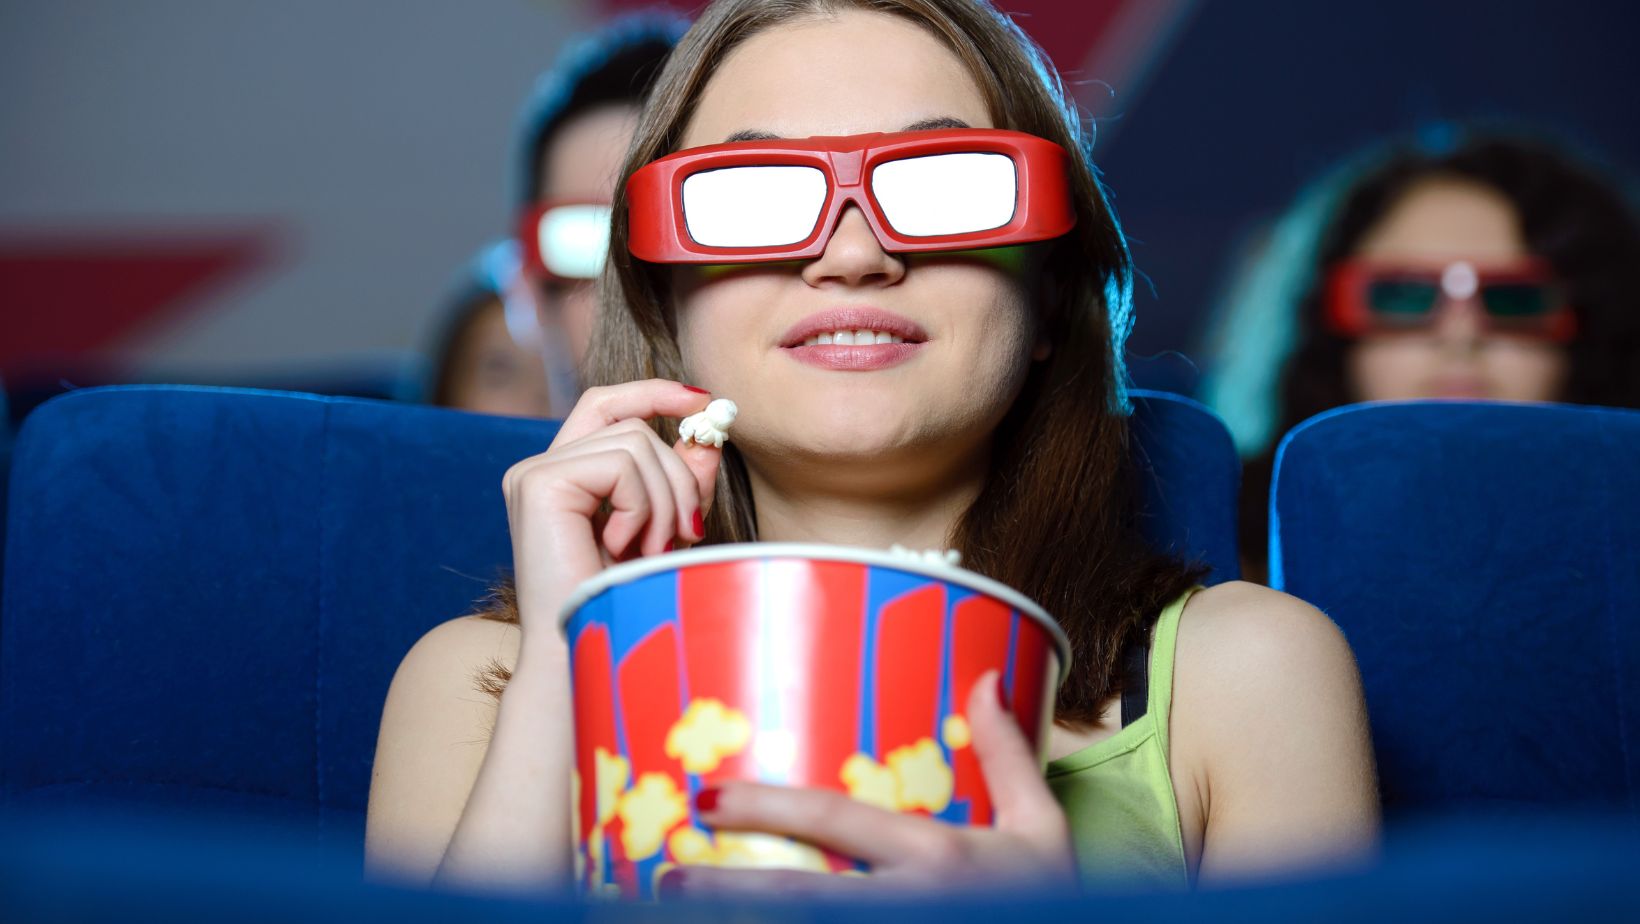 Regal Sandhill IMAX & RPX The Ultimate Movie Experience You've Been